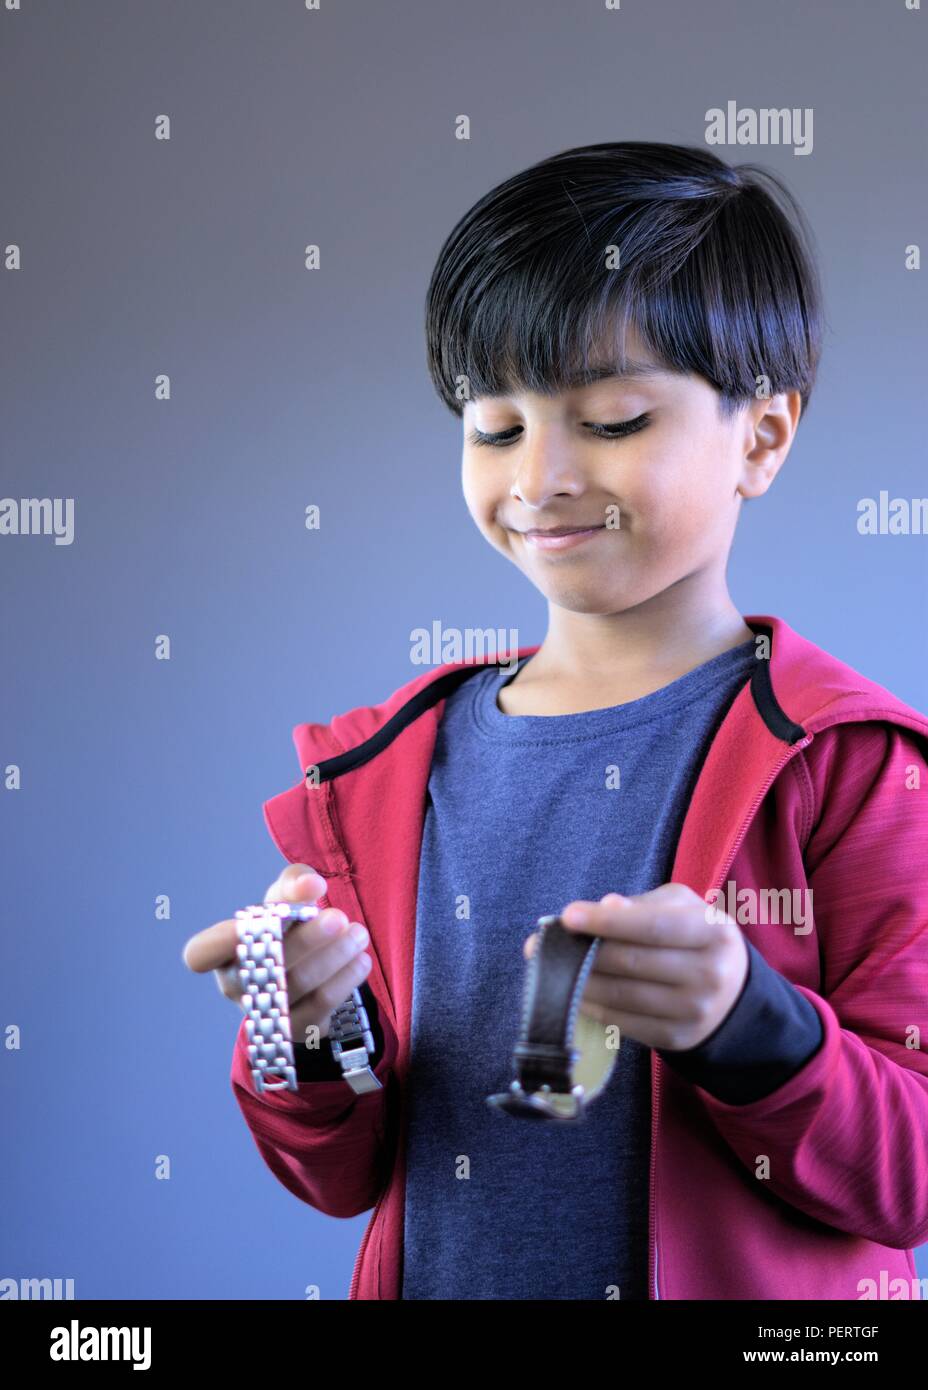 Looking at time. Smiling child holding wrist watches. Kid holding two wrist watches. Stock Photo